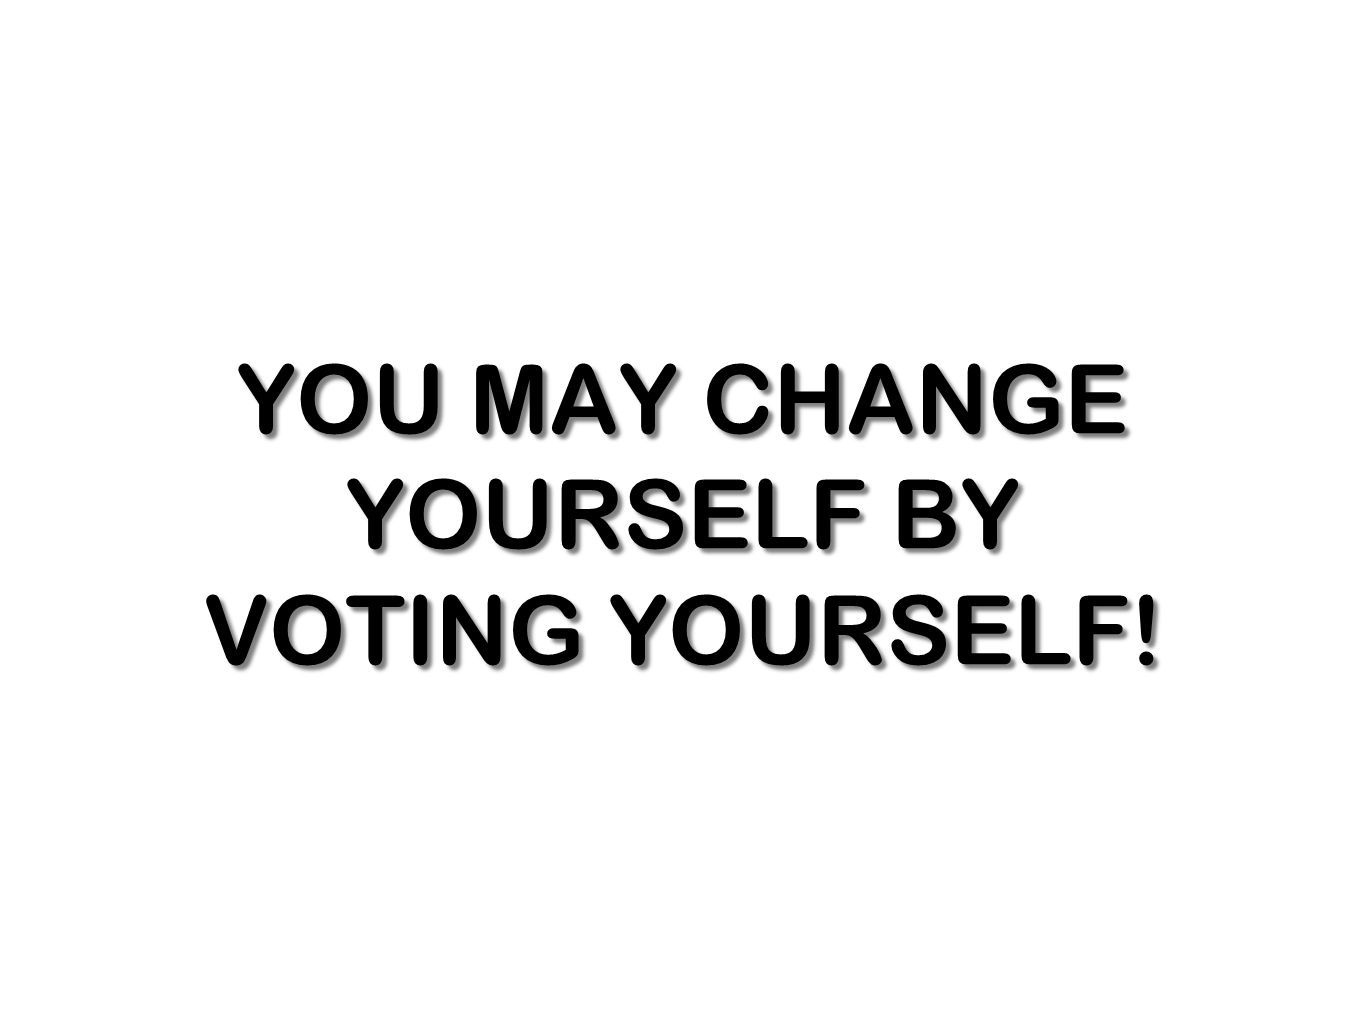 YOU MAY CHANGE YOURSELF BY VOTING YOURSELF!